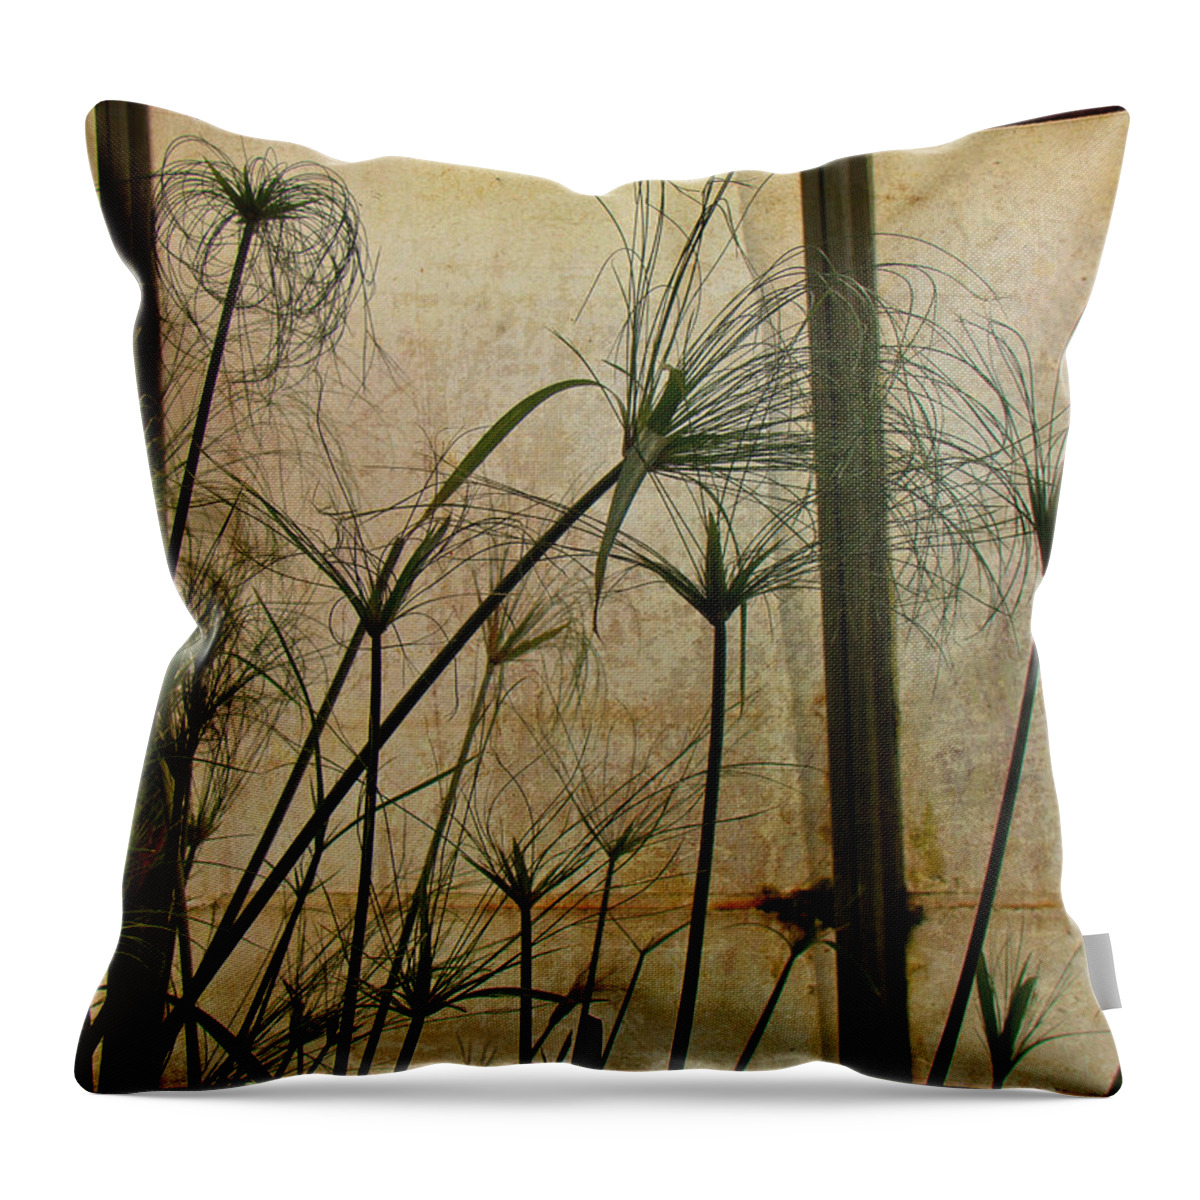 Papyrus Throw Pillow featuring the photograph Papyrus by Carol Senske